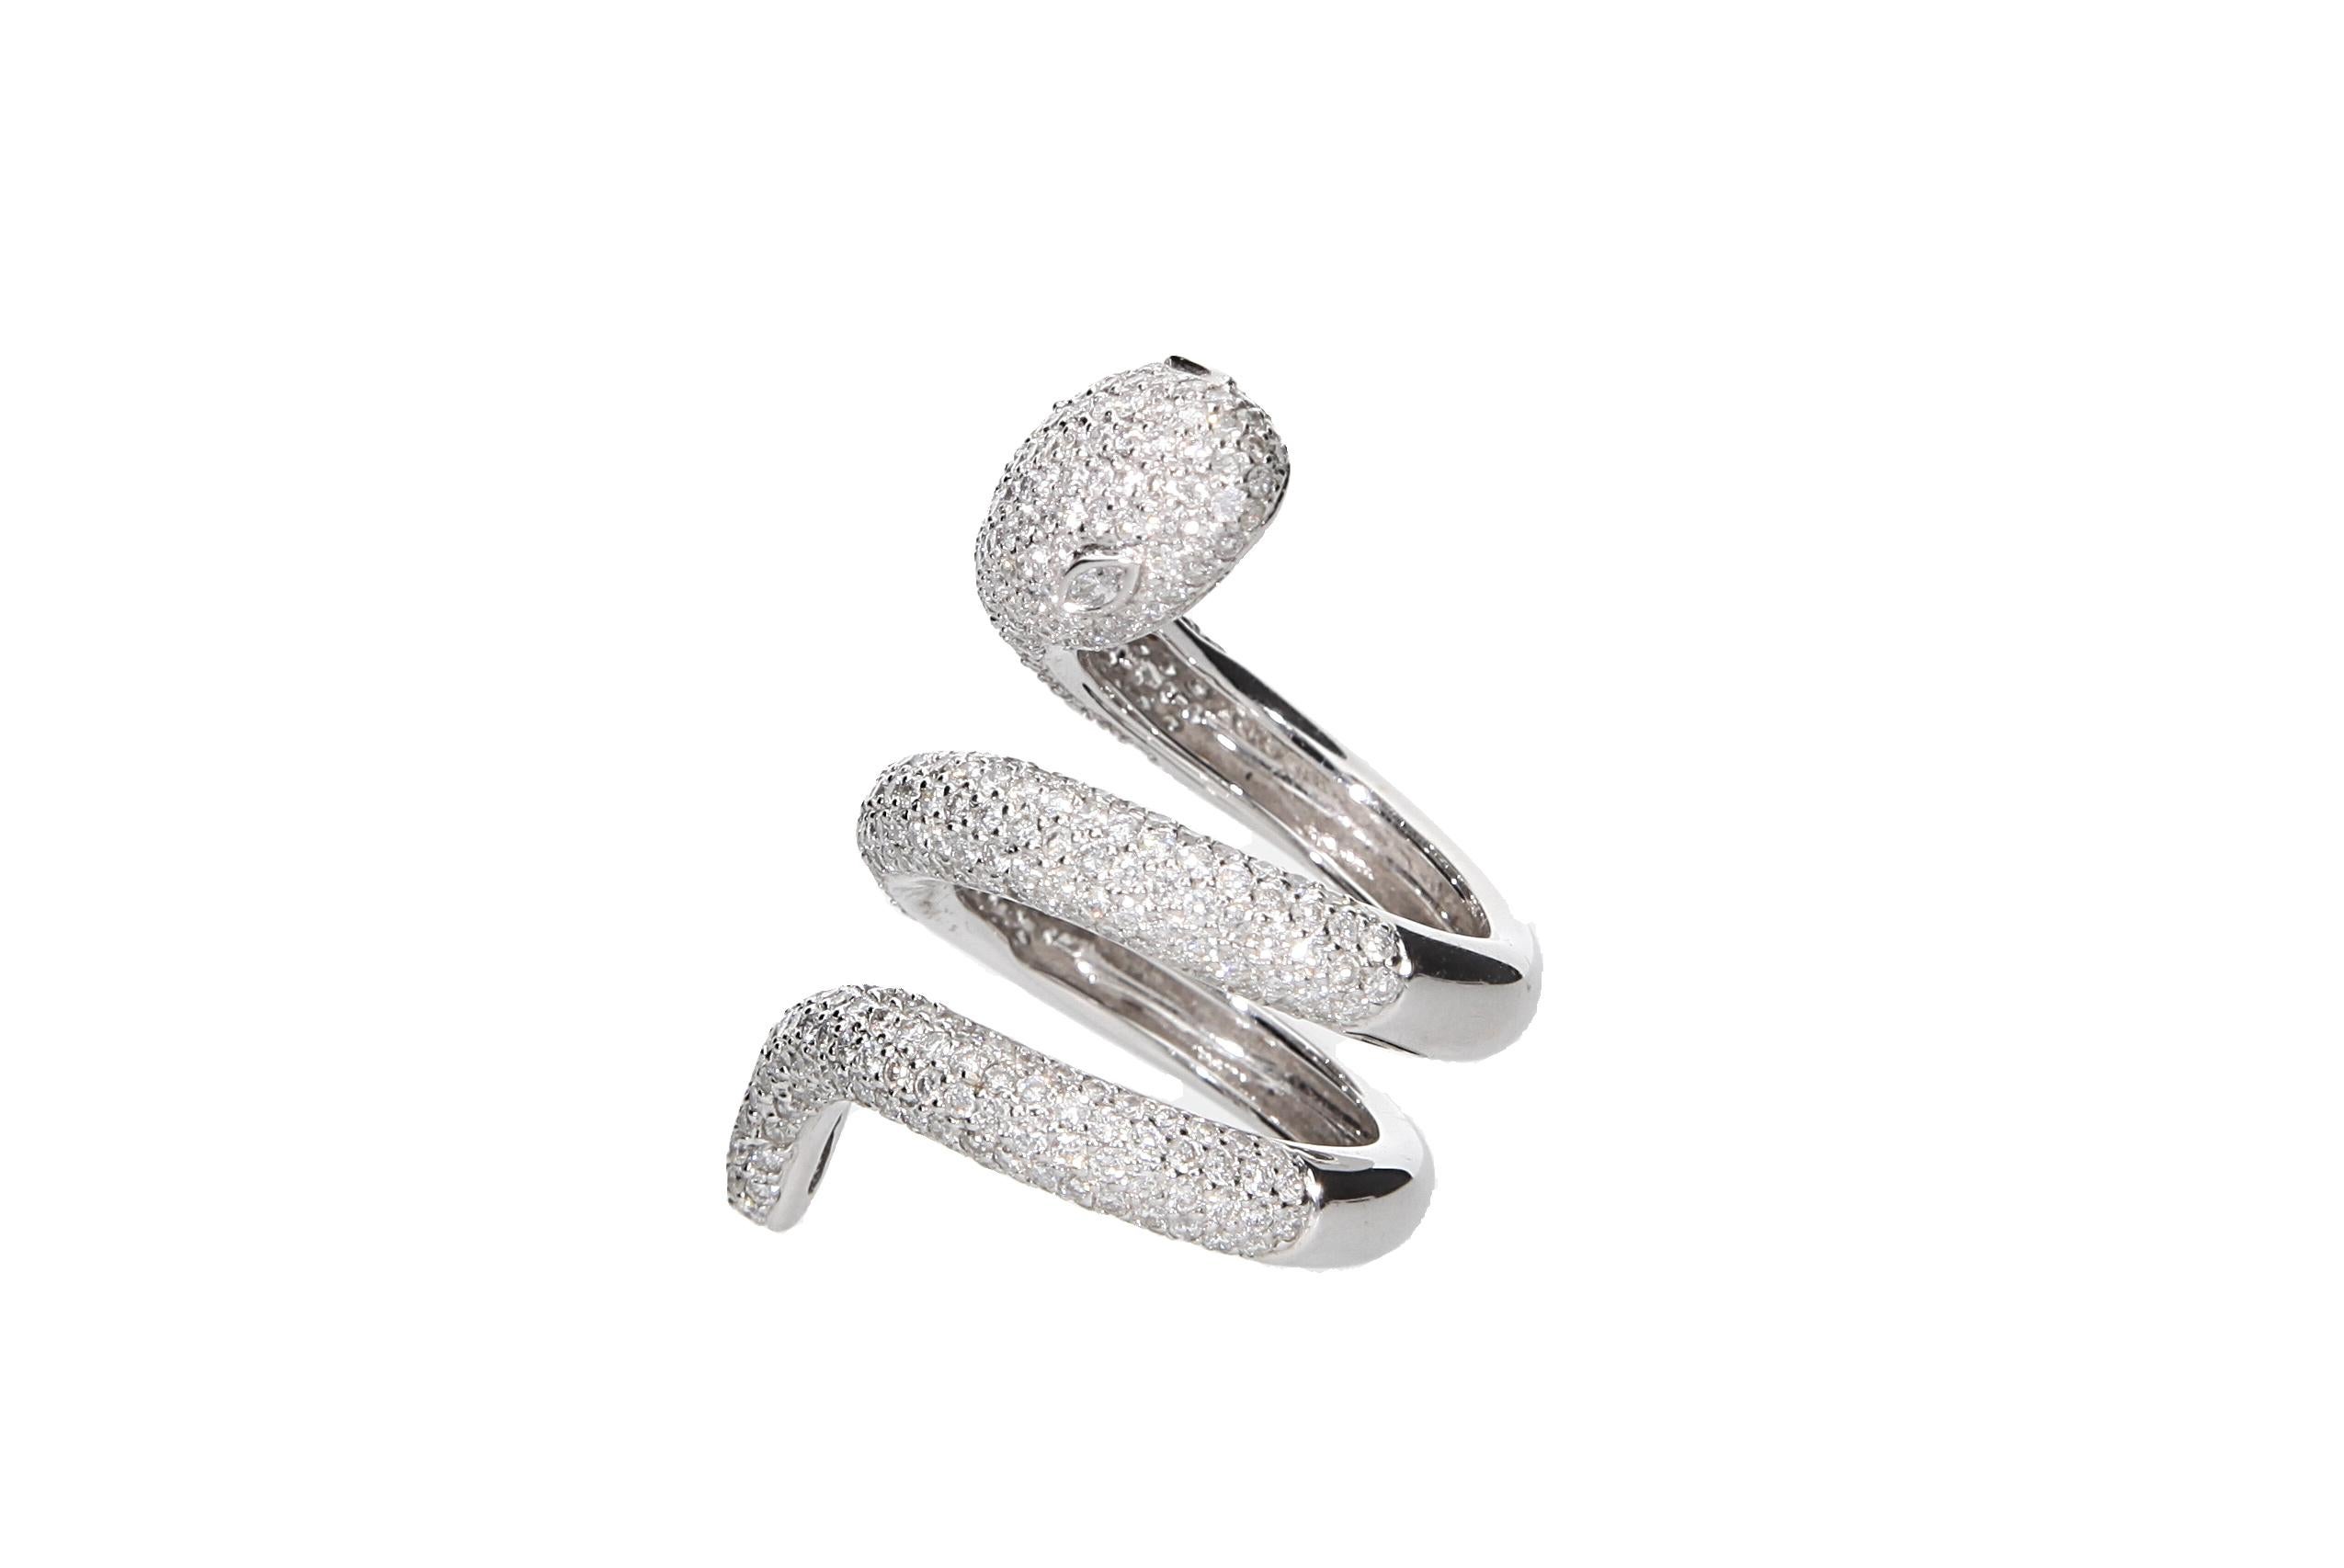 Women's Diamonds ct 4.02. Snake Ring. 18 Kt White Gold. Made in Italy For Sale